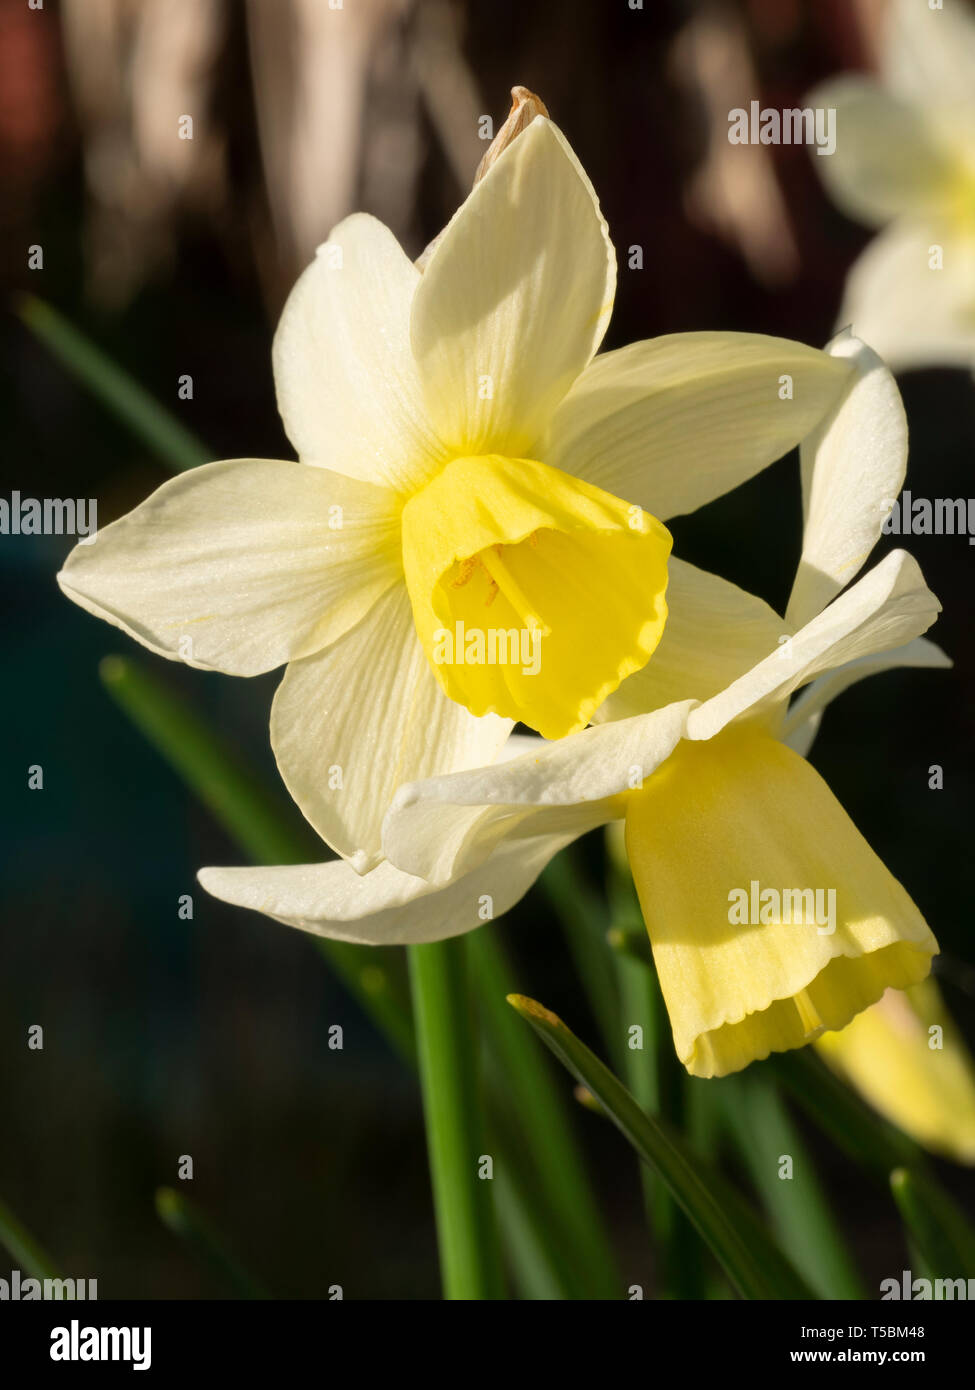 Pale yellow and cream flowers of the scented, multi-headed jonquilla daffodil, Narcissus 'Sailboat' Stock Photo